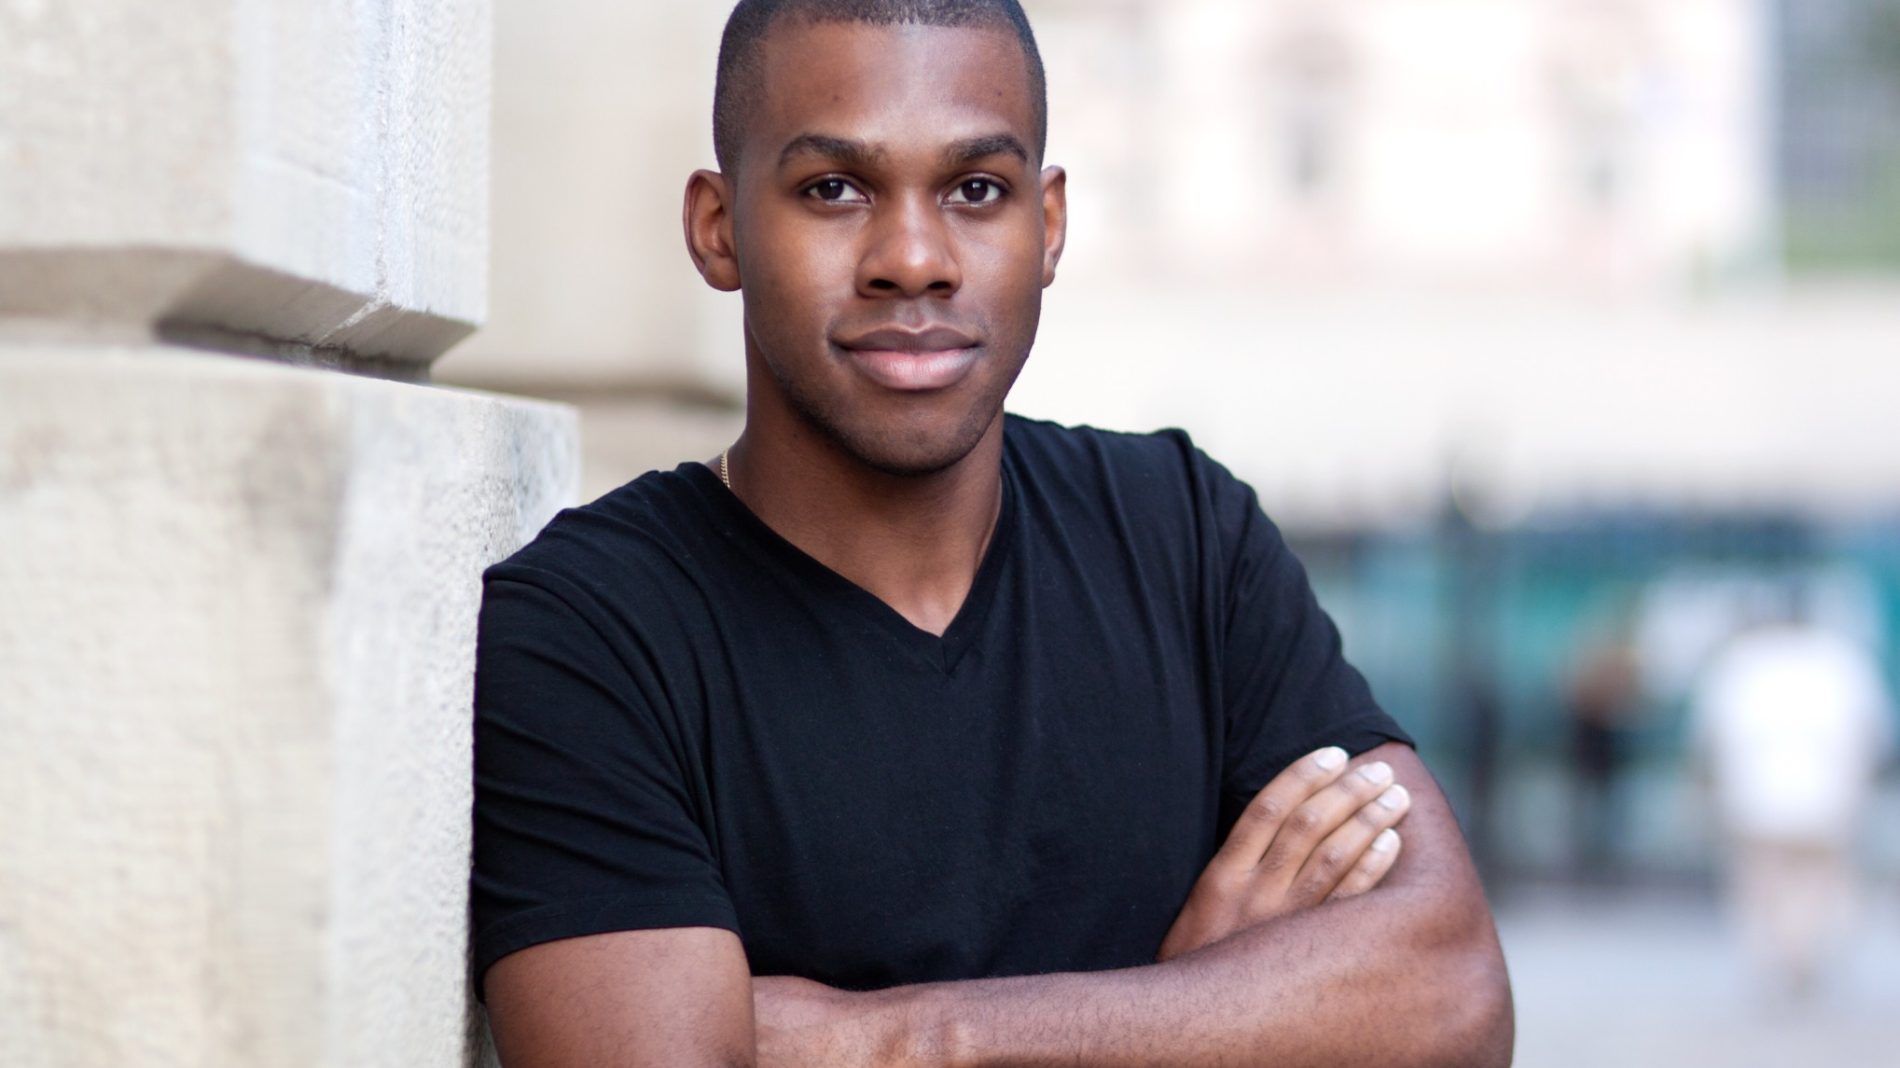 A young Black person leaning against a wall